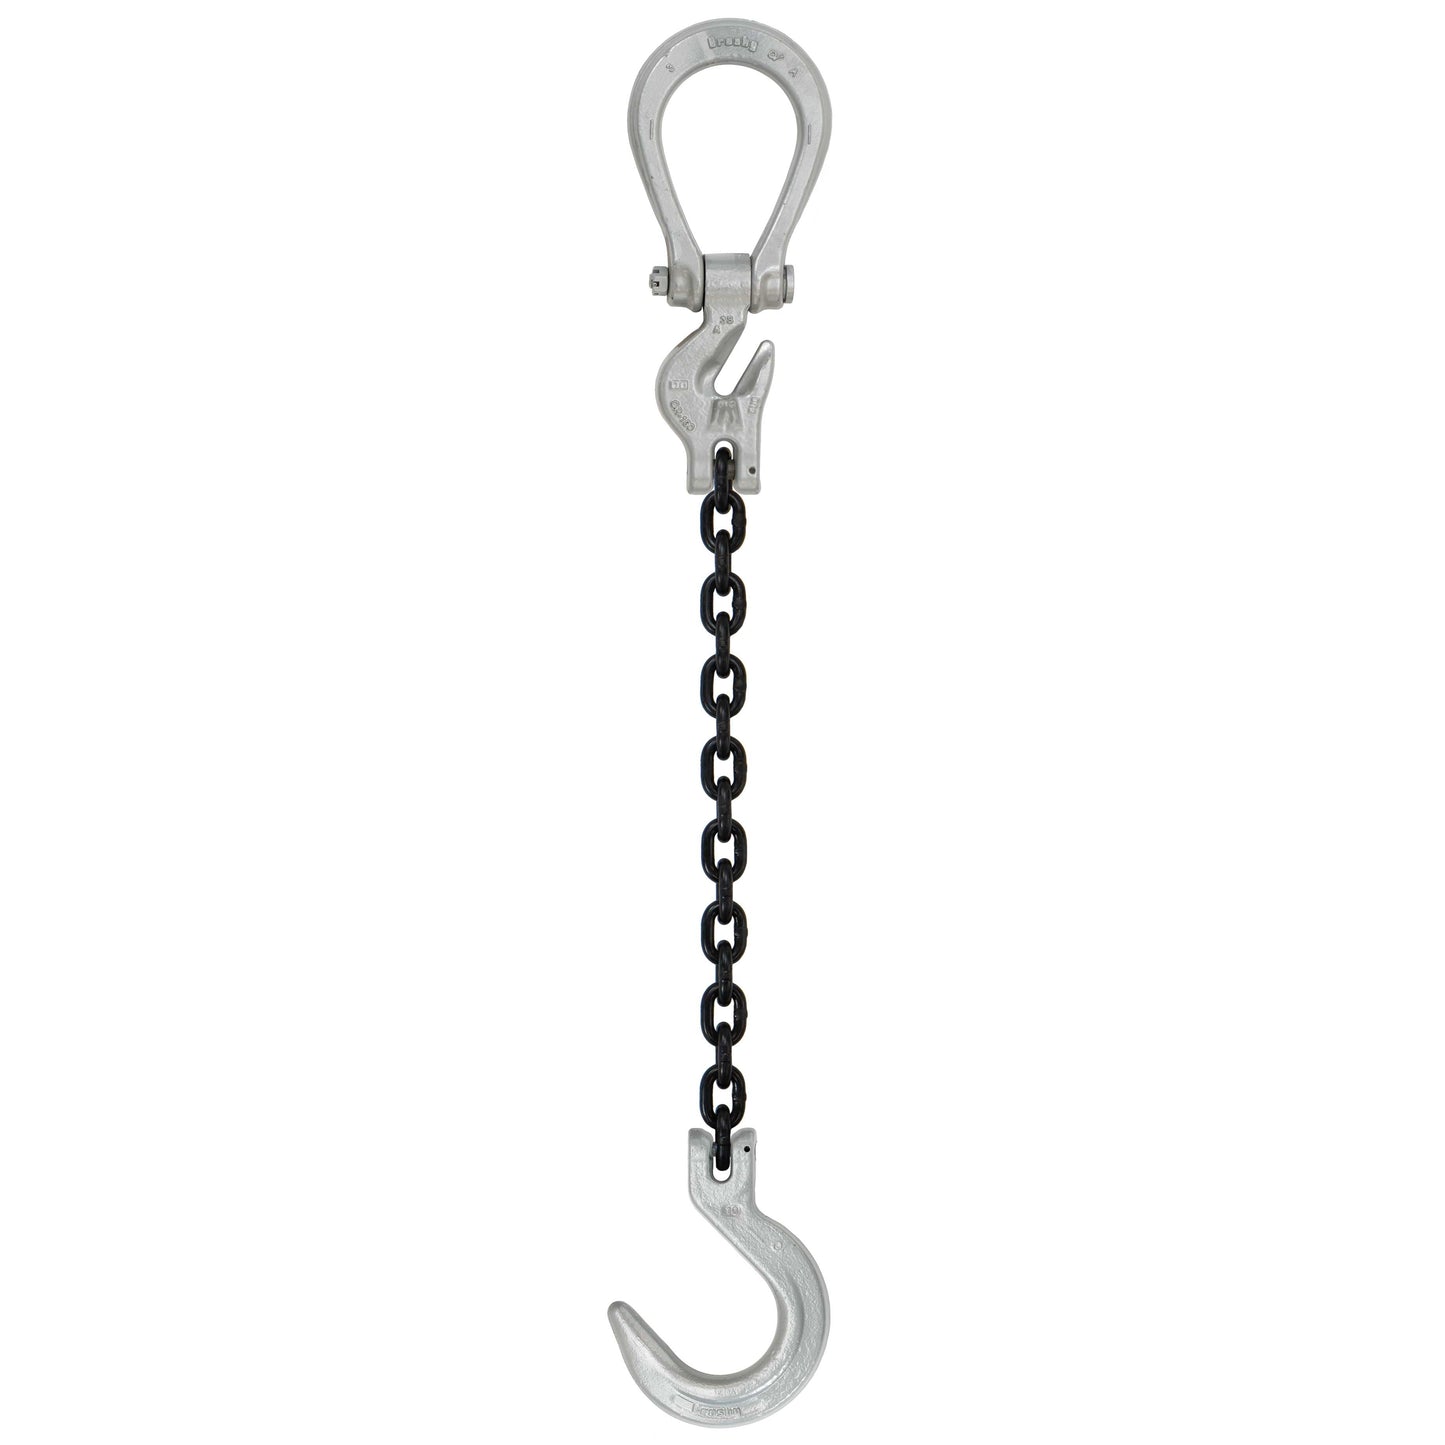 516 inch x 15 foot Domestic Adjustable Single Leg Chain Sling w Crosby Foundry Hook Grade 100 image 1 of 2